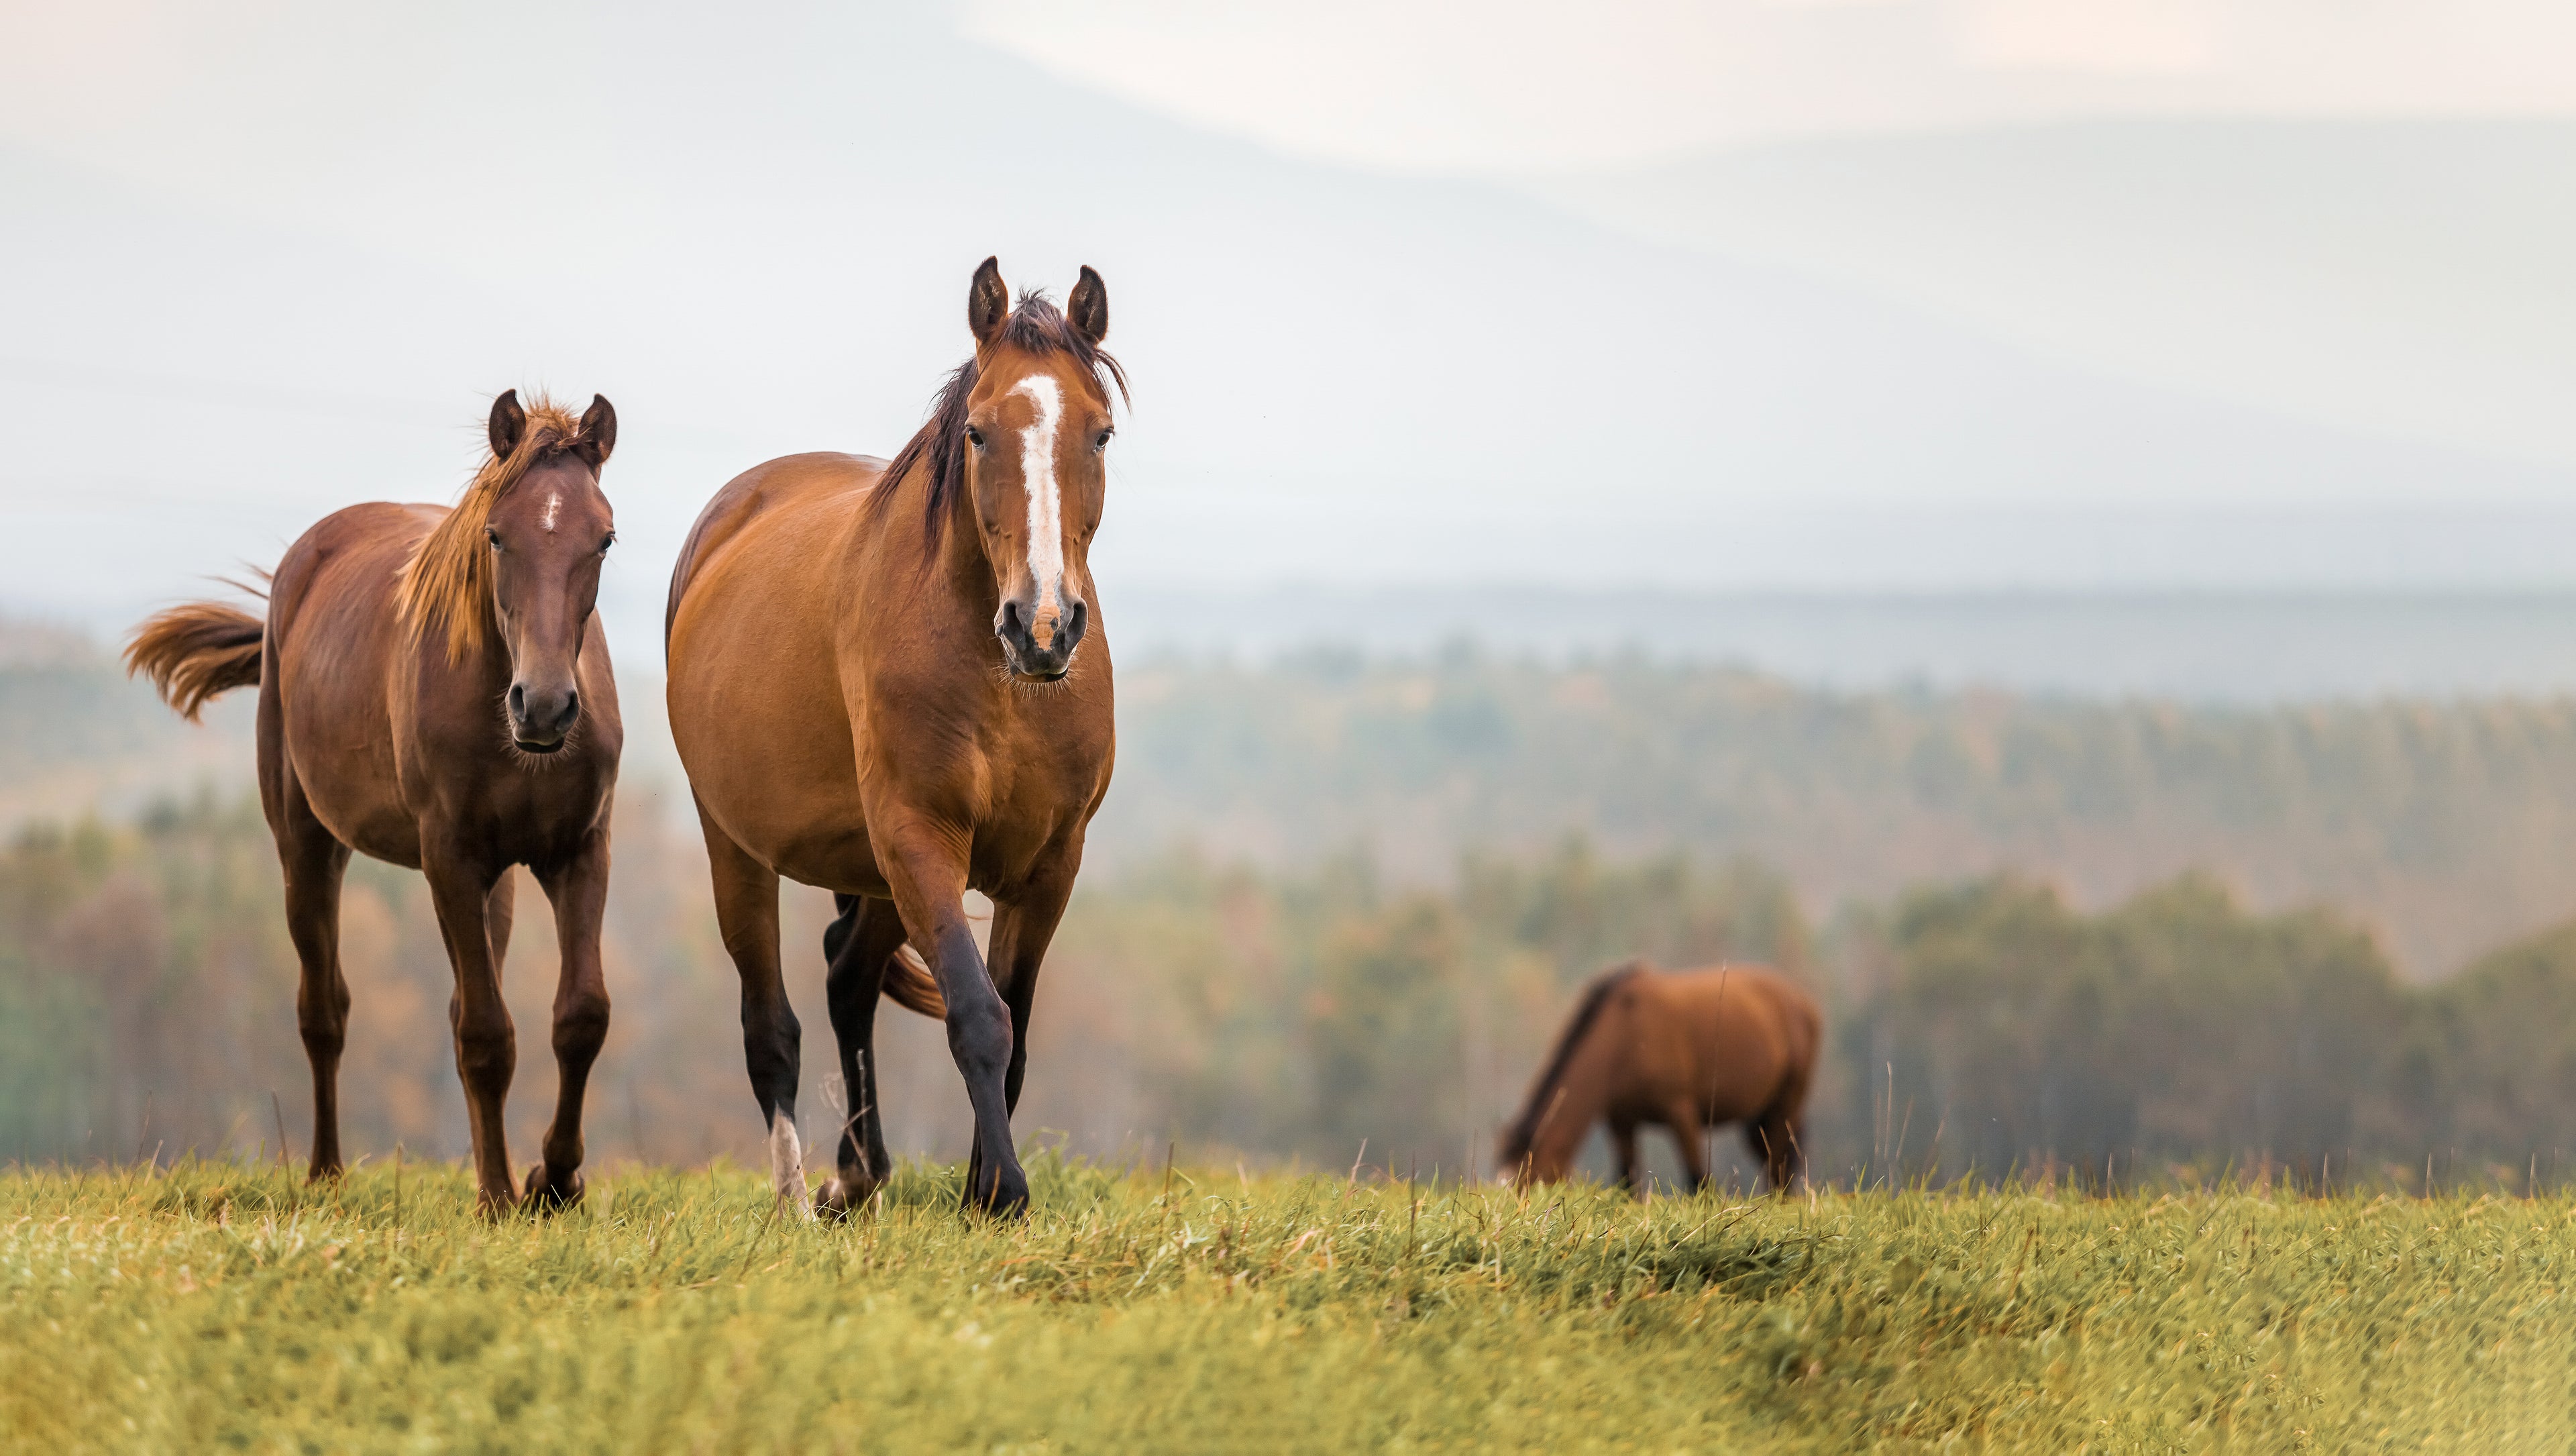 Equine care products on horses in field to keep flies away